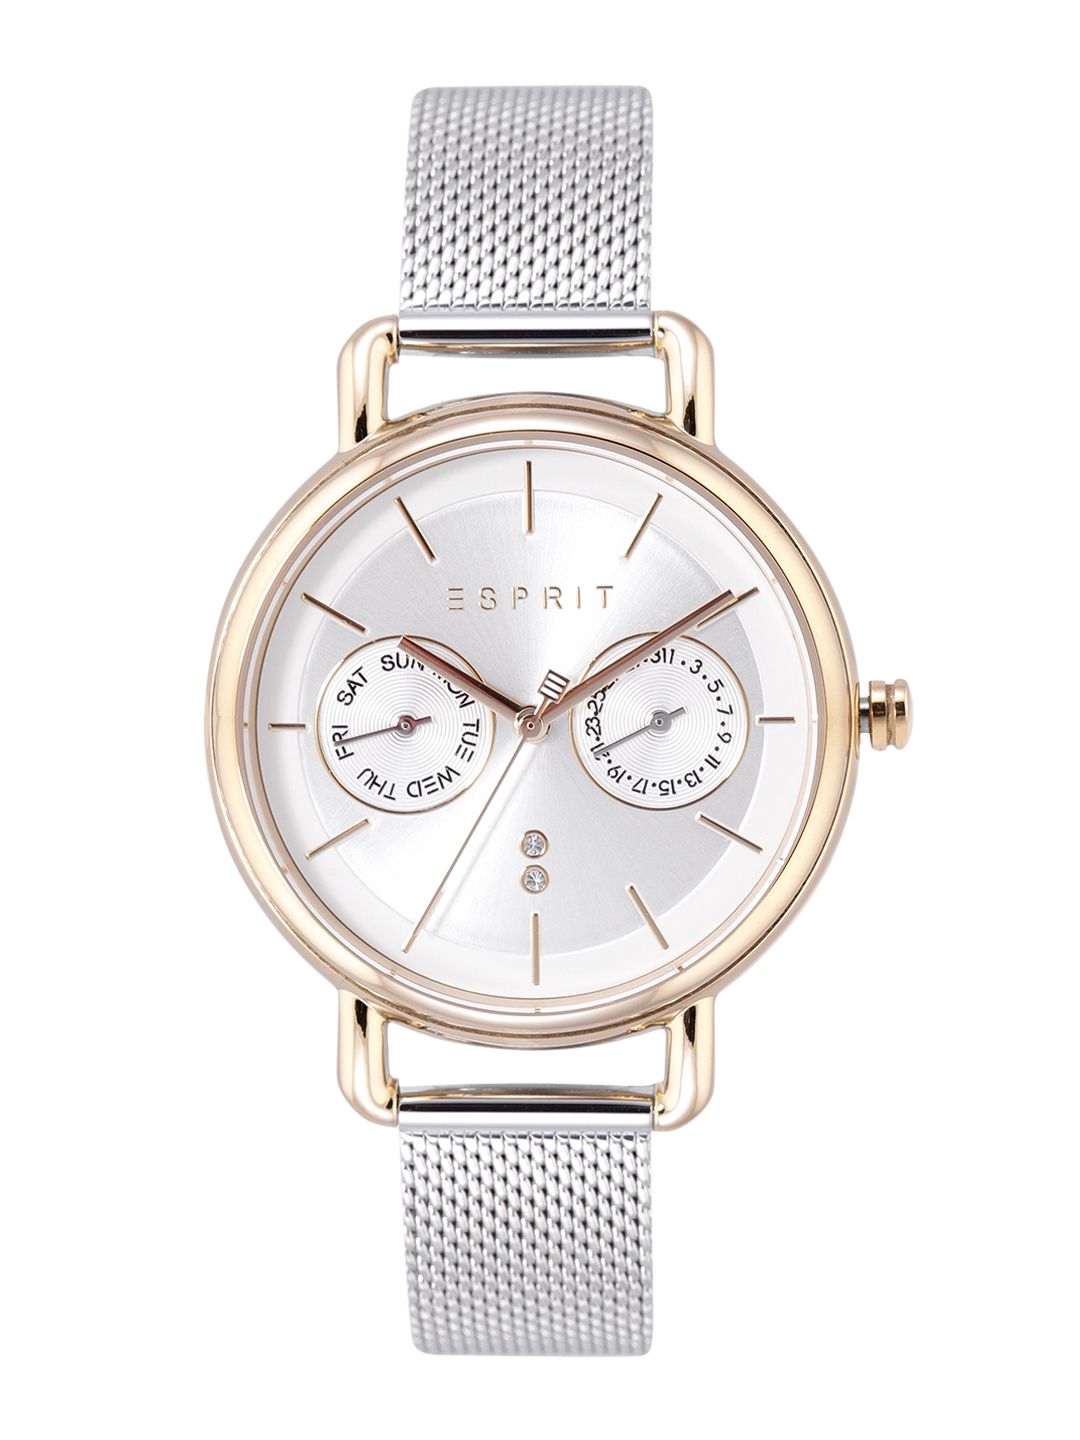 ESPRIT Women Silver-Toned Dial & Bracelet Style Straps Analogue Watch ES1L179M0105 Price in India